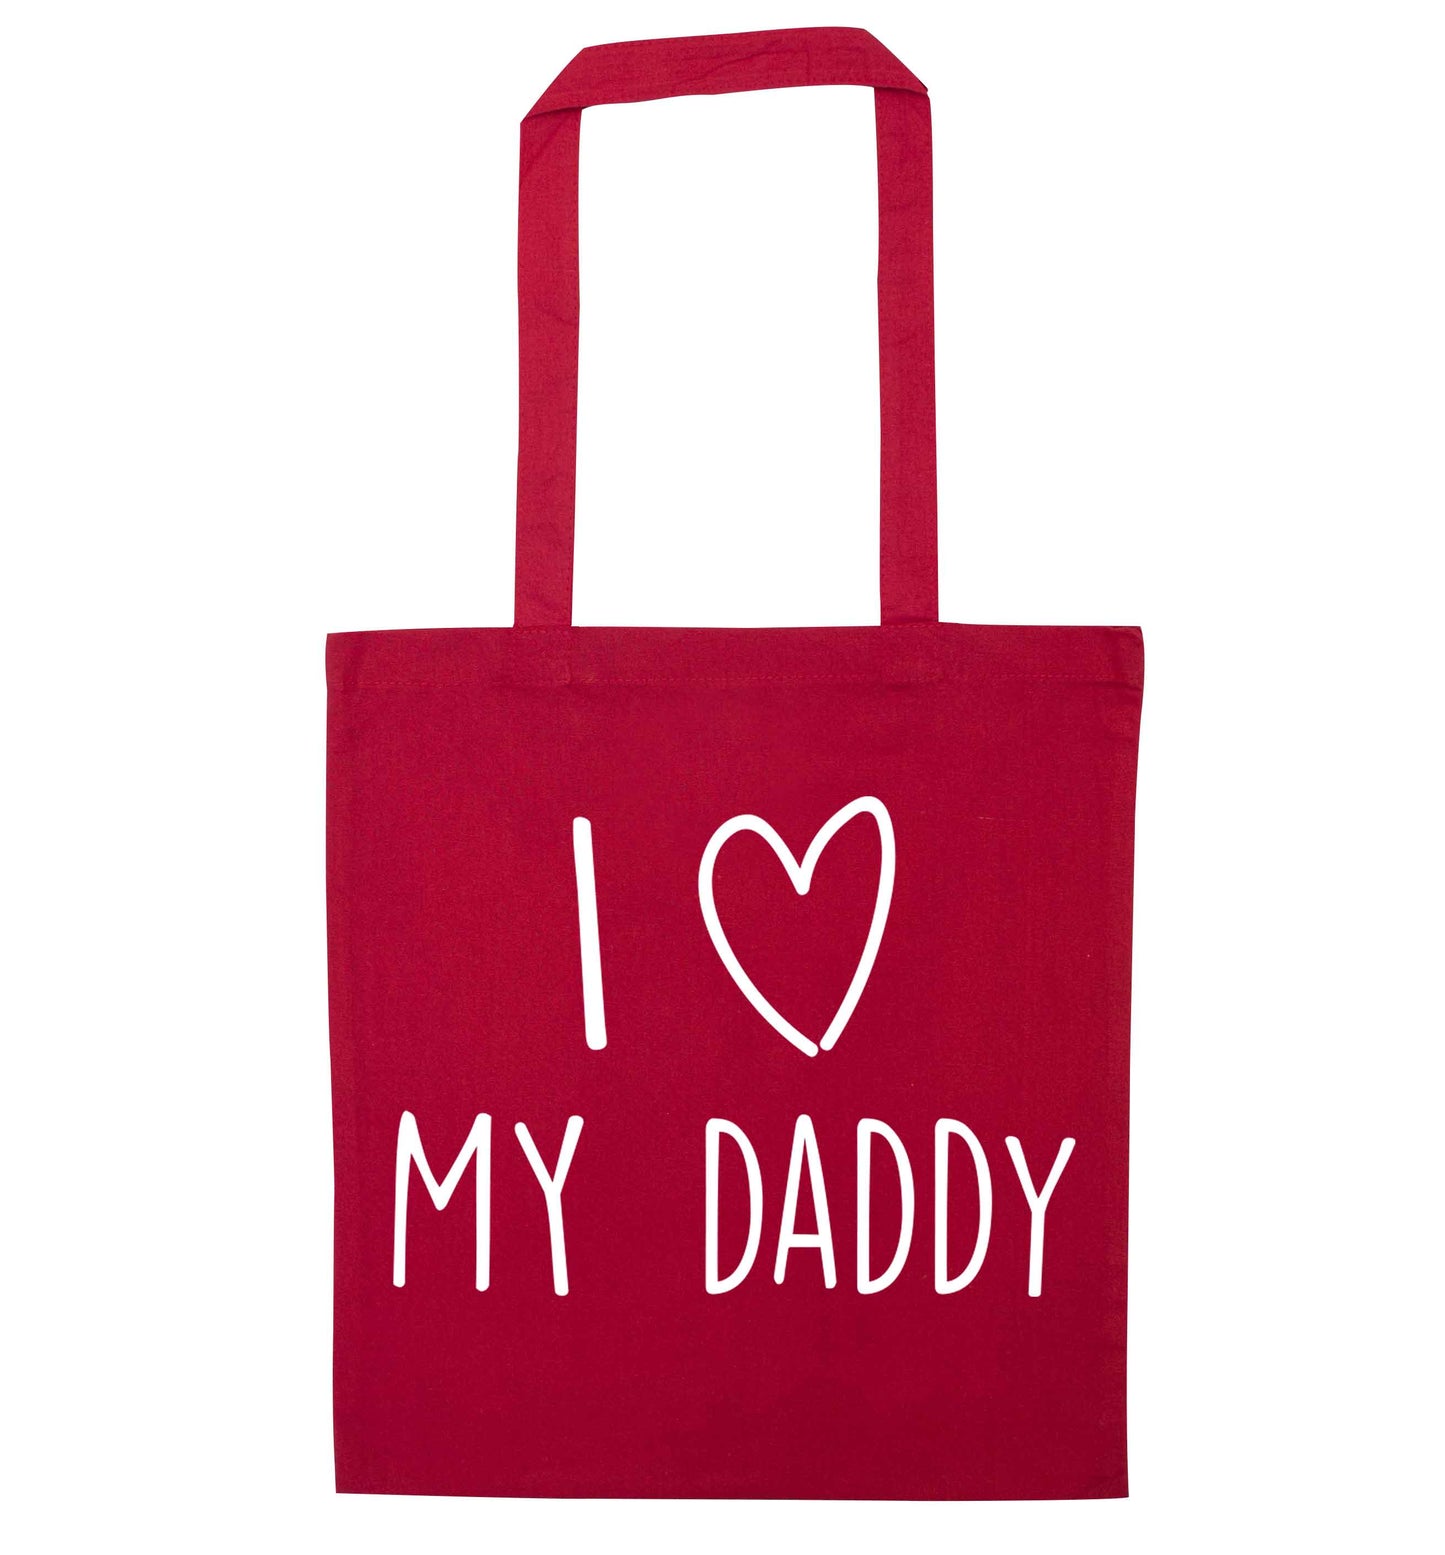 I love my daddy red tote bag